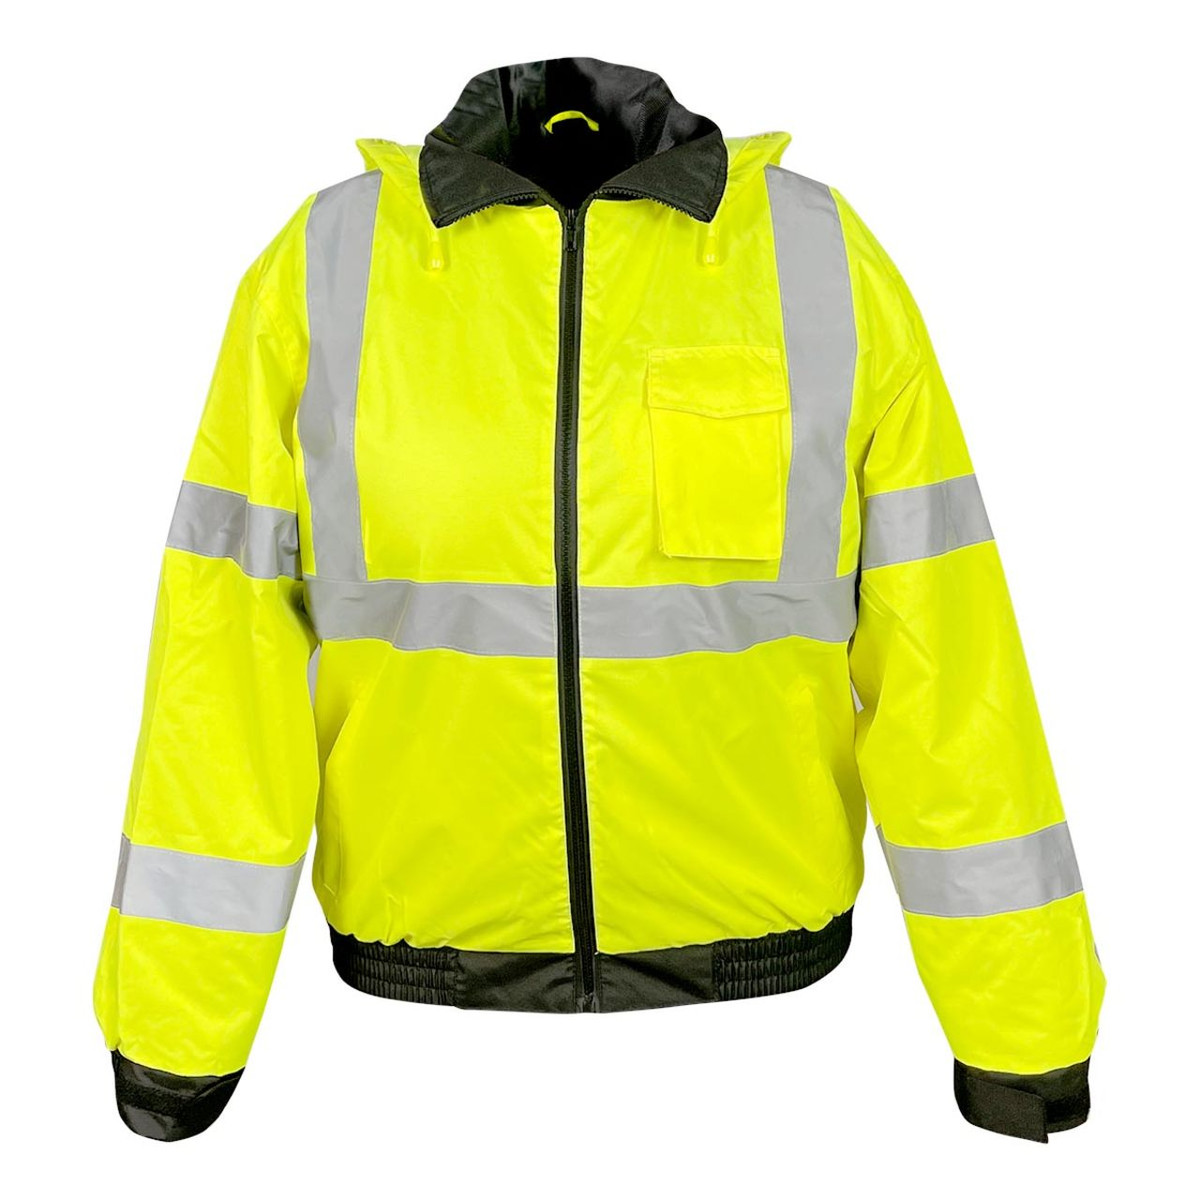 Class3 High Visibility Bomber Jacket with Built-in Liner - 3